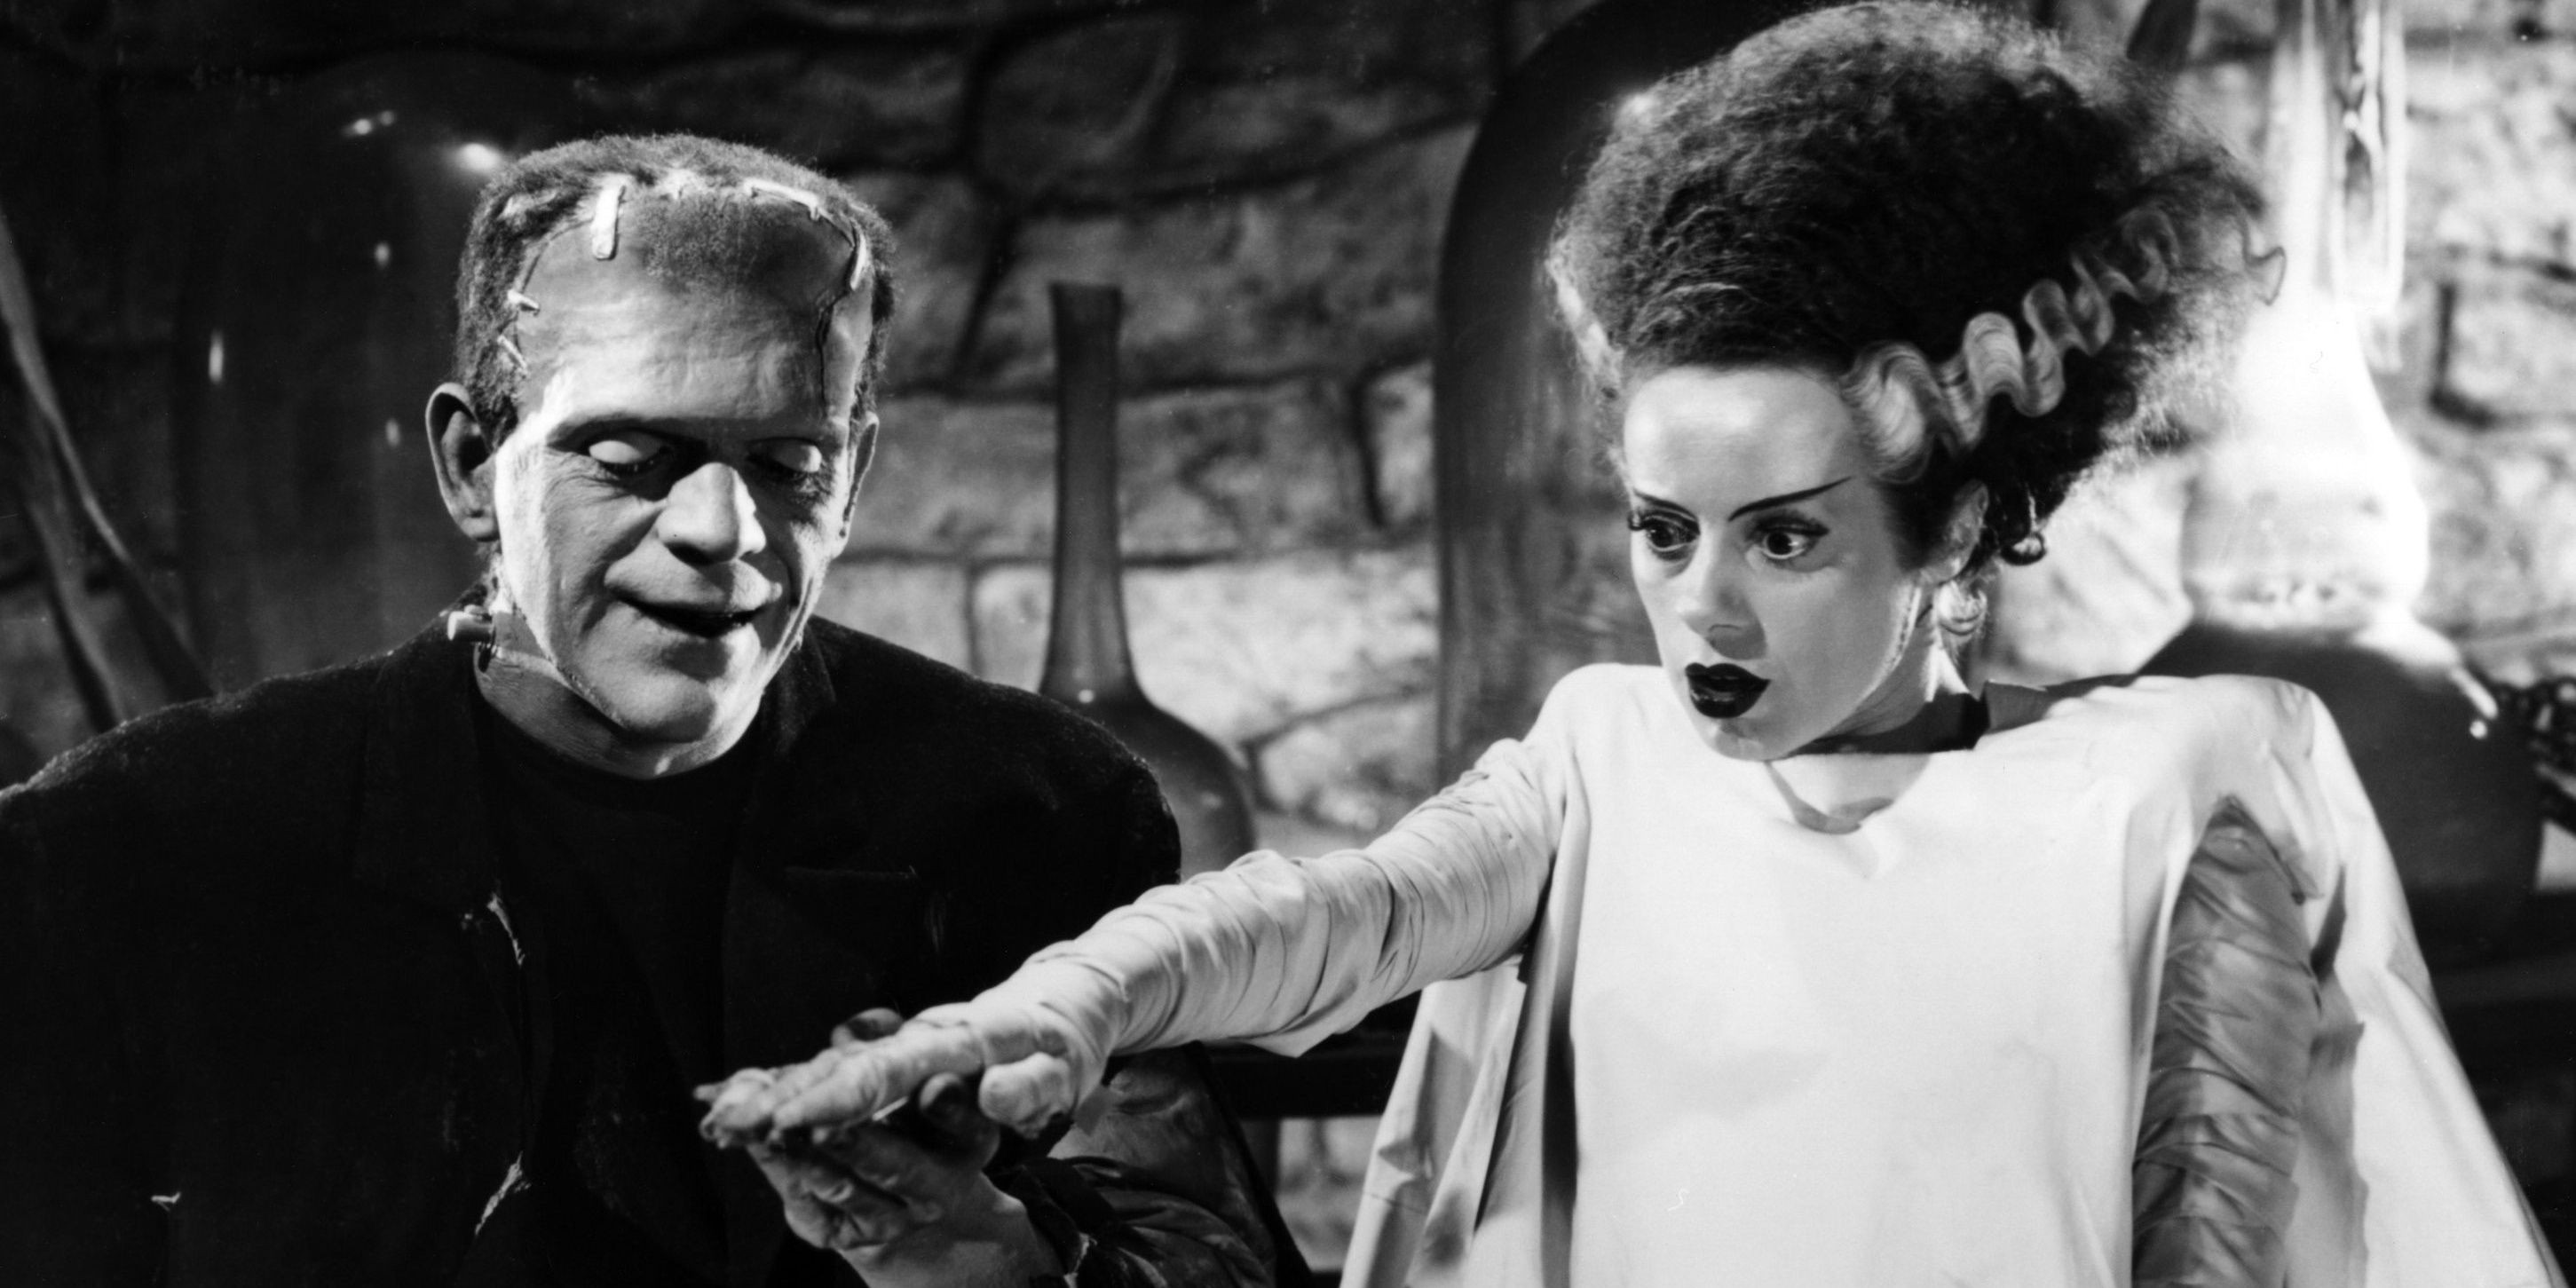 The Bride of Frankenstein learns to move as Frankenstein grins